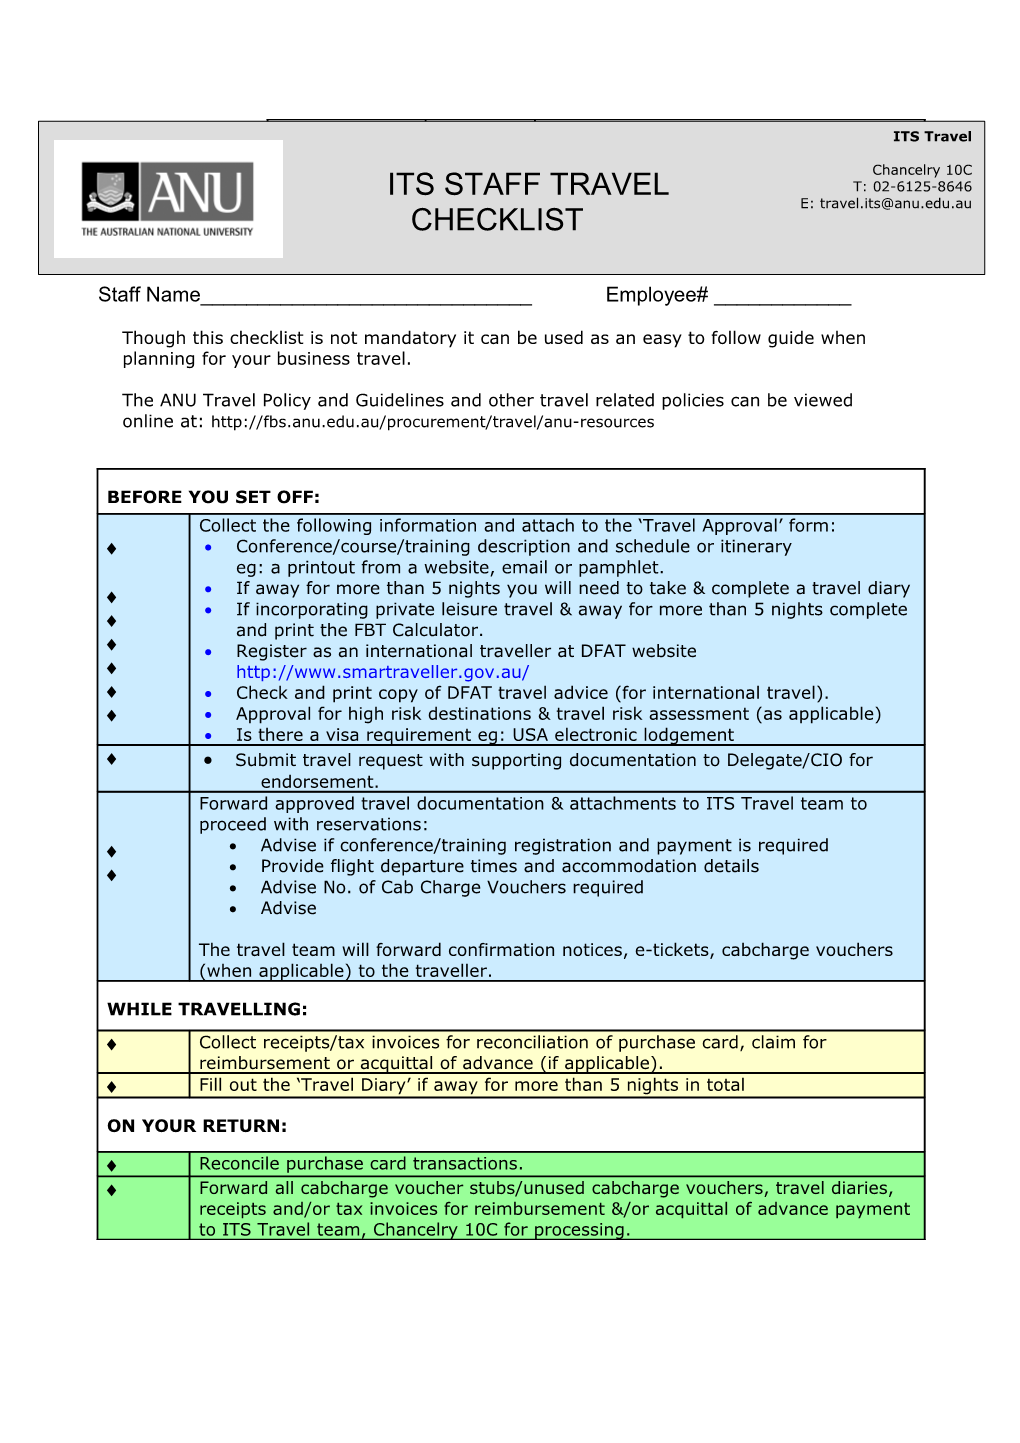 Though This Checklist Is Not Mandatory It Can Be Used As an Easy to Follow Guide When Planning